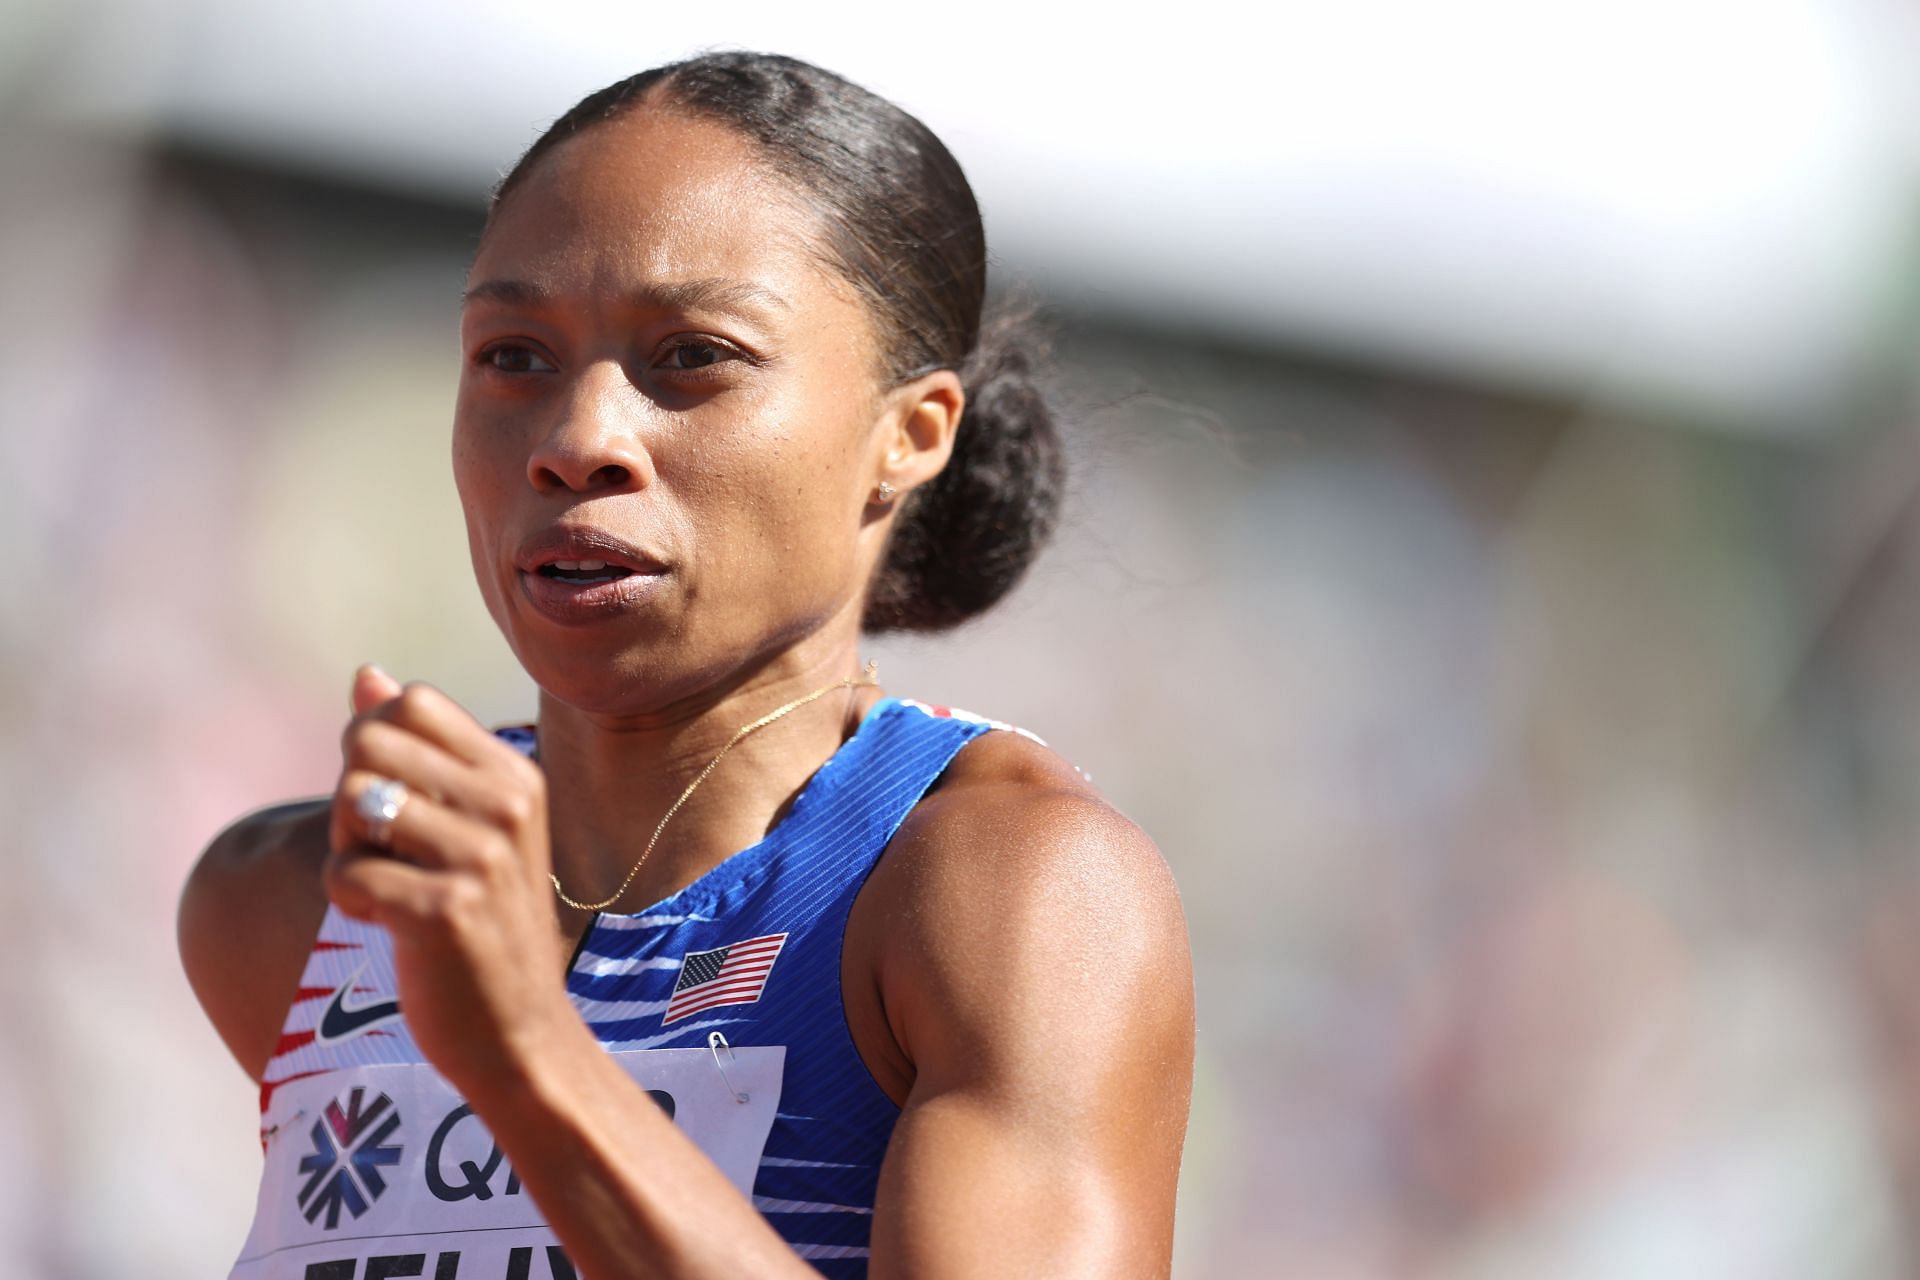 Allyson Felix on the Last Teachable Moment with Her Daughter